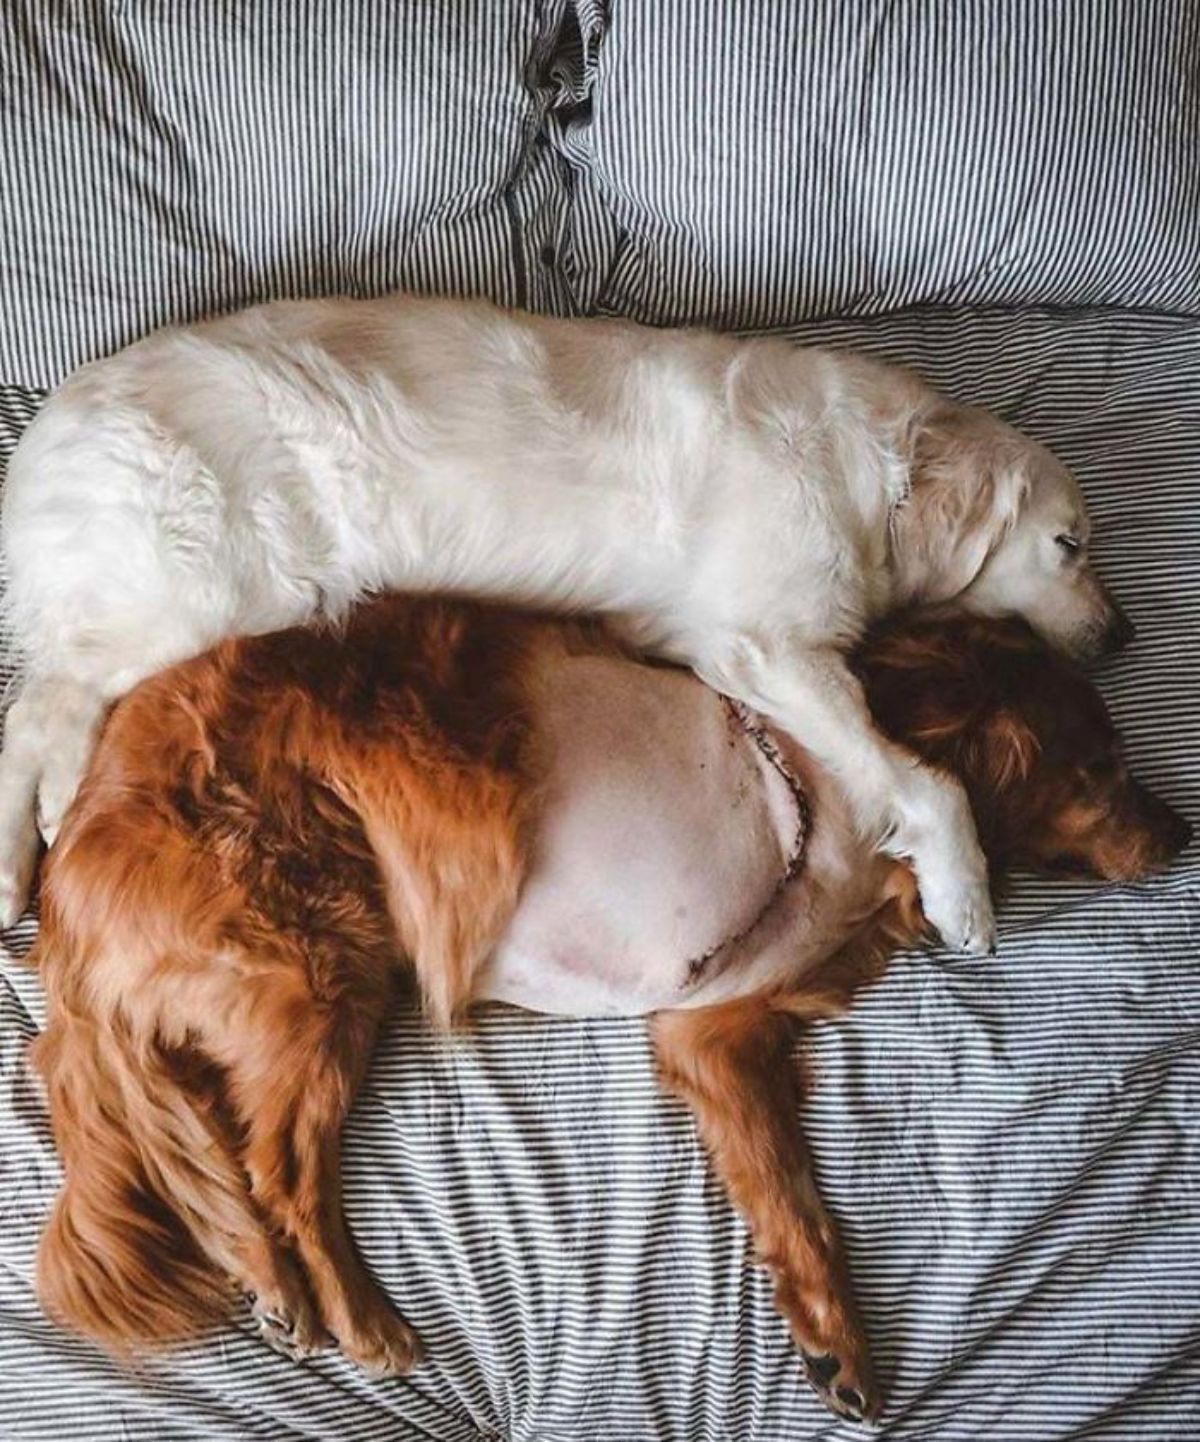 light golden retriever laying sideways on a bed hugging a dark golden retriever that has the body shaved and stitches around the chest